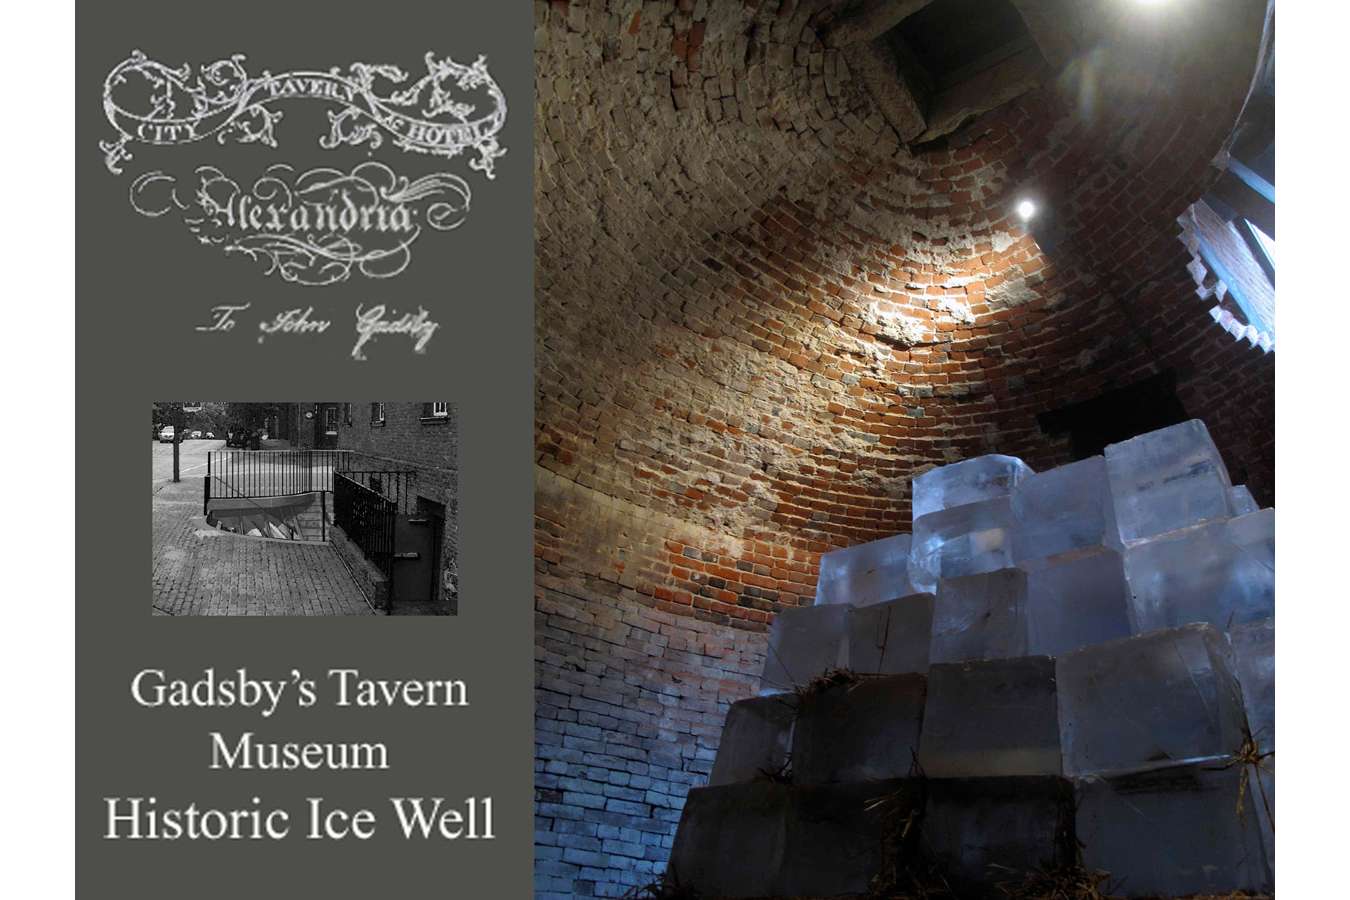 GADS Ice 1p : The Ice Well at Gadsby's Tavern – Loaded with ice for a promotional event